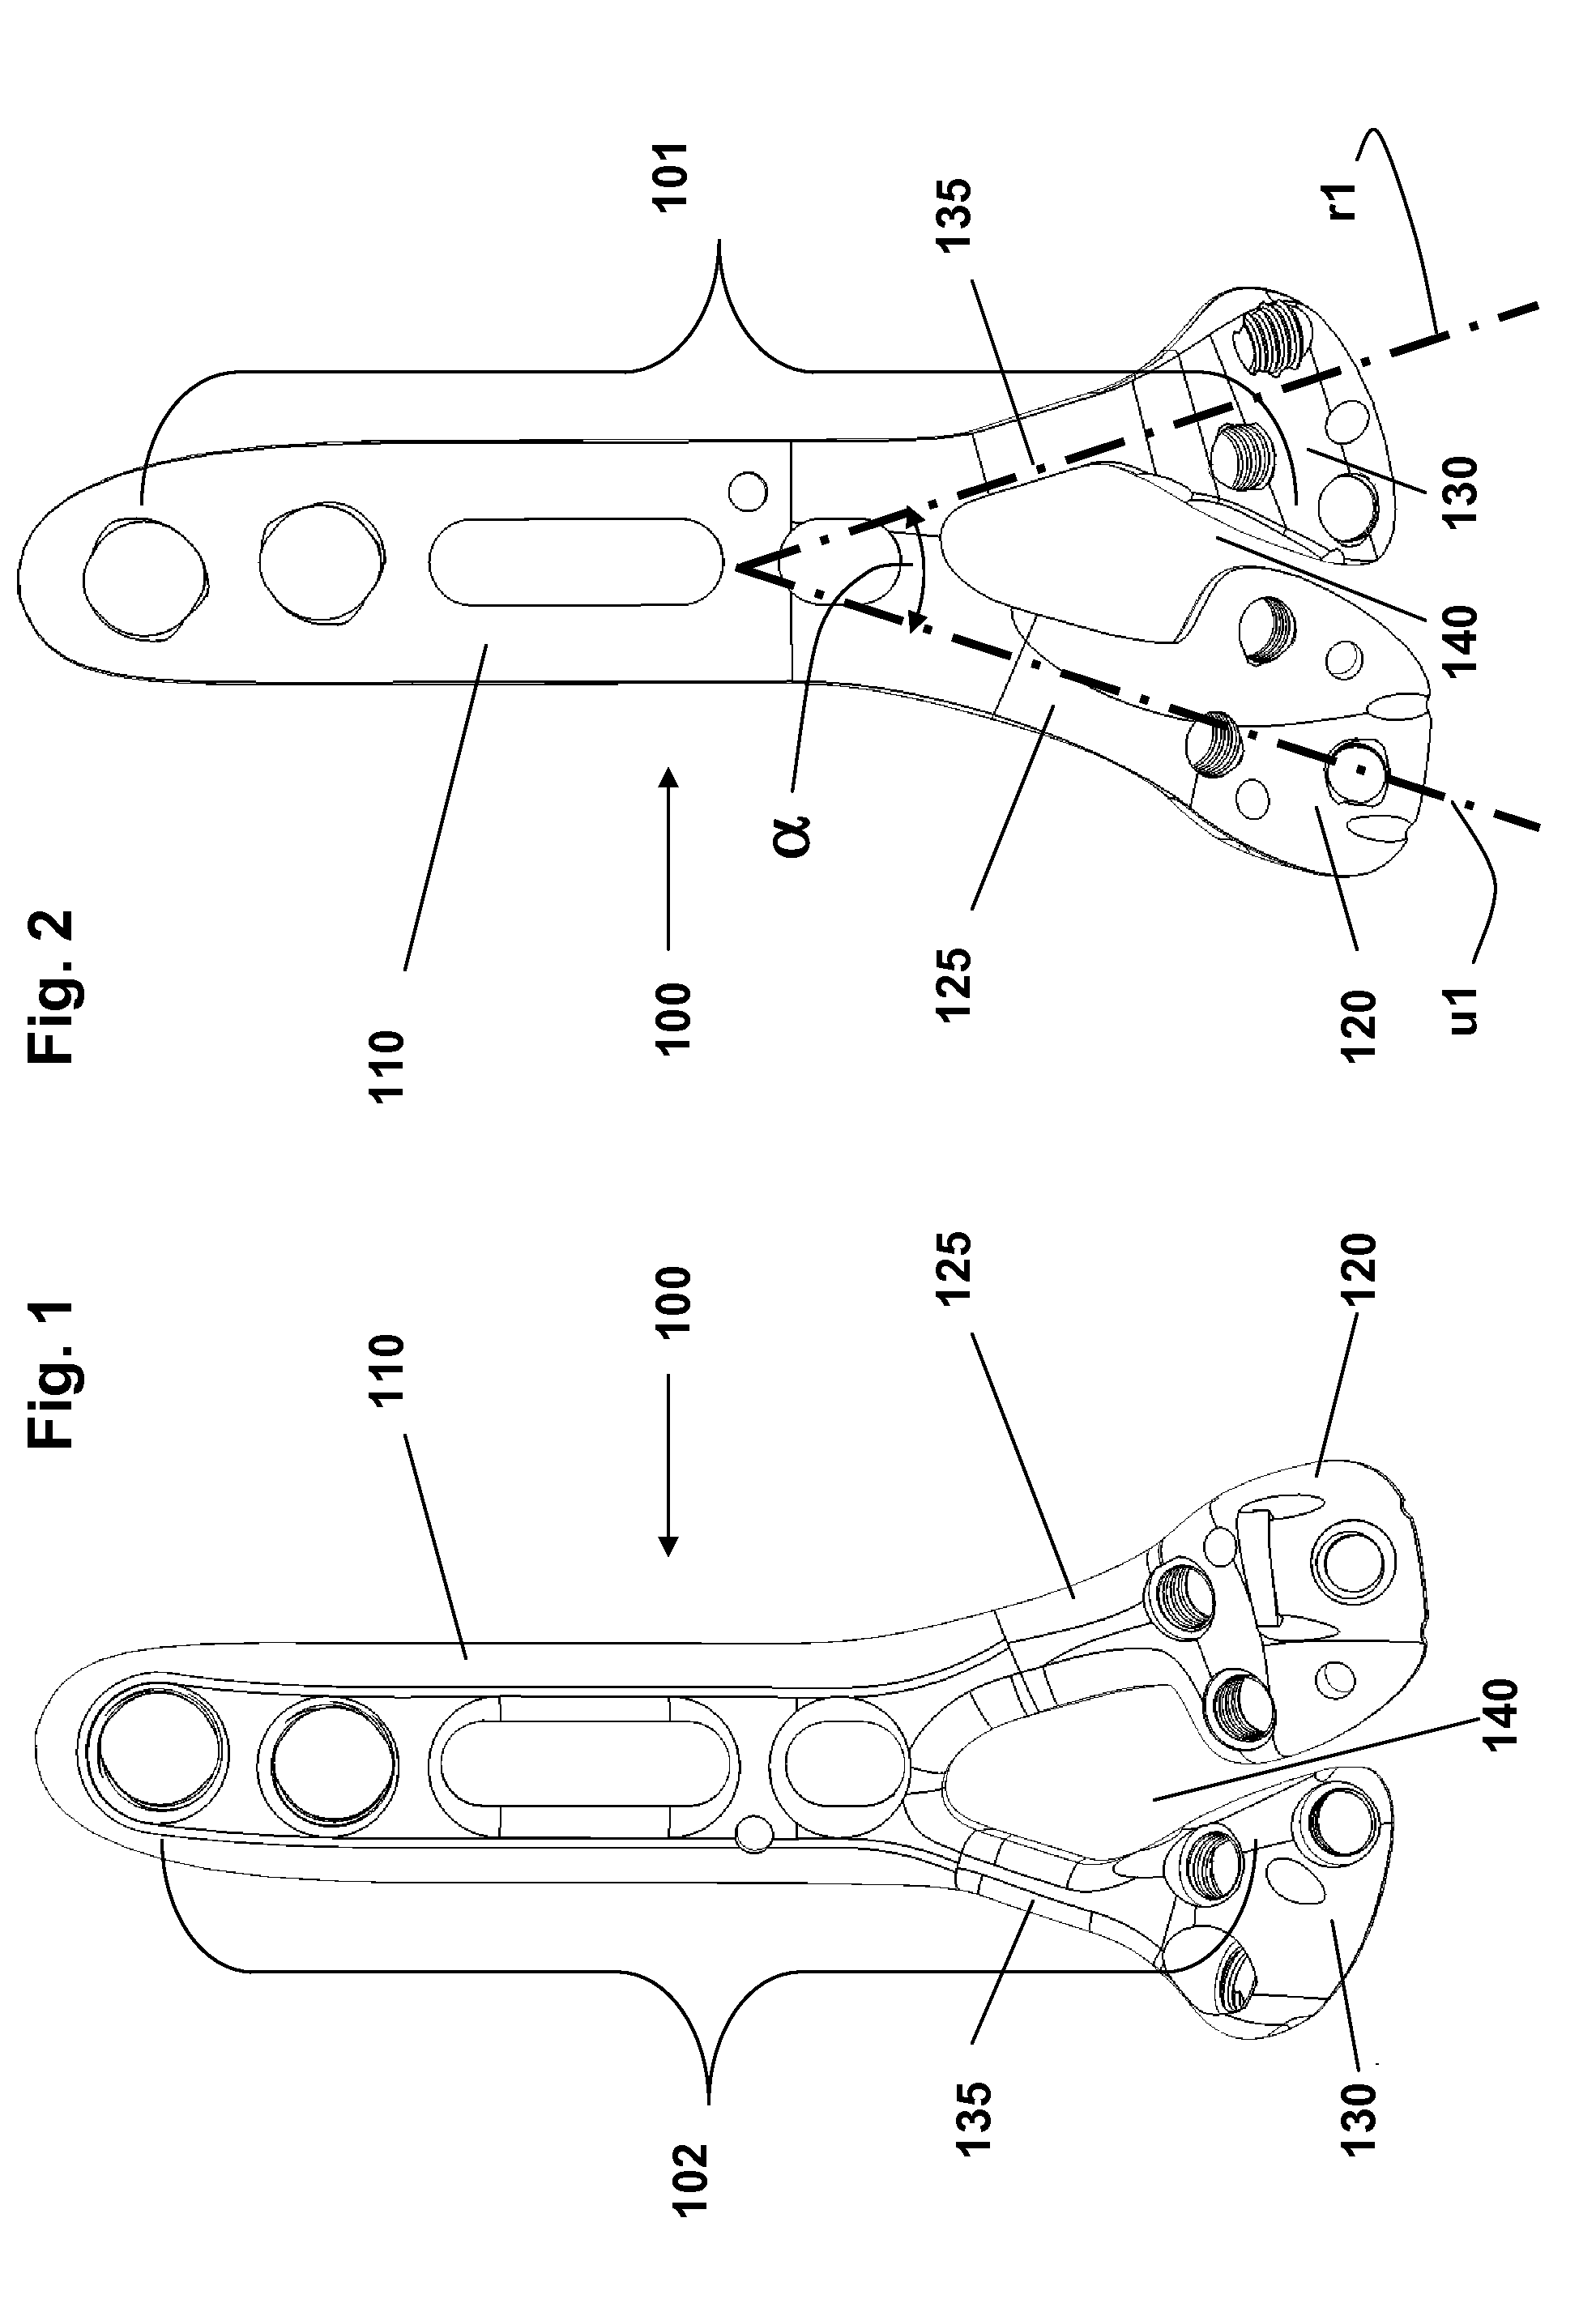 Fracture fixation plate, system and methods of use